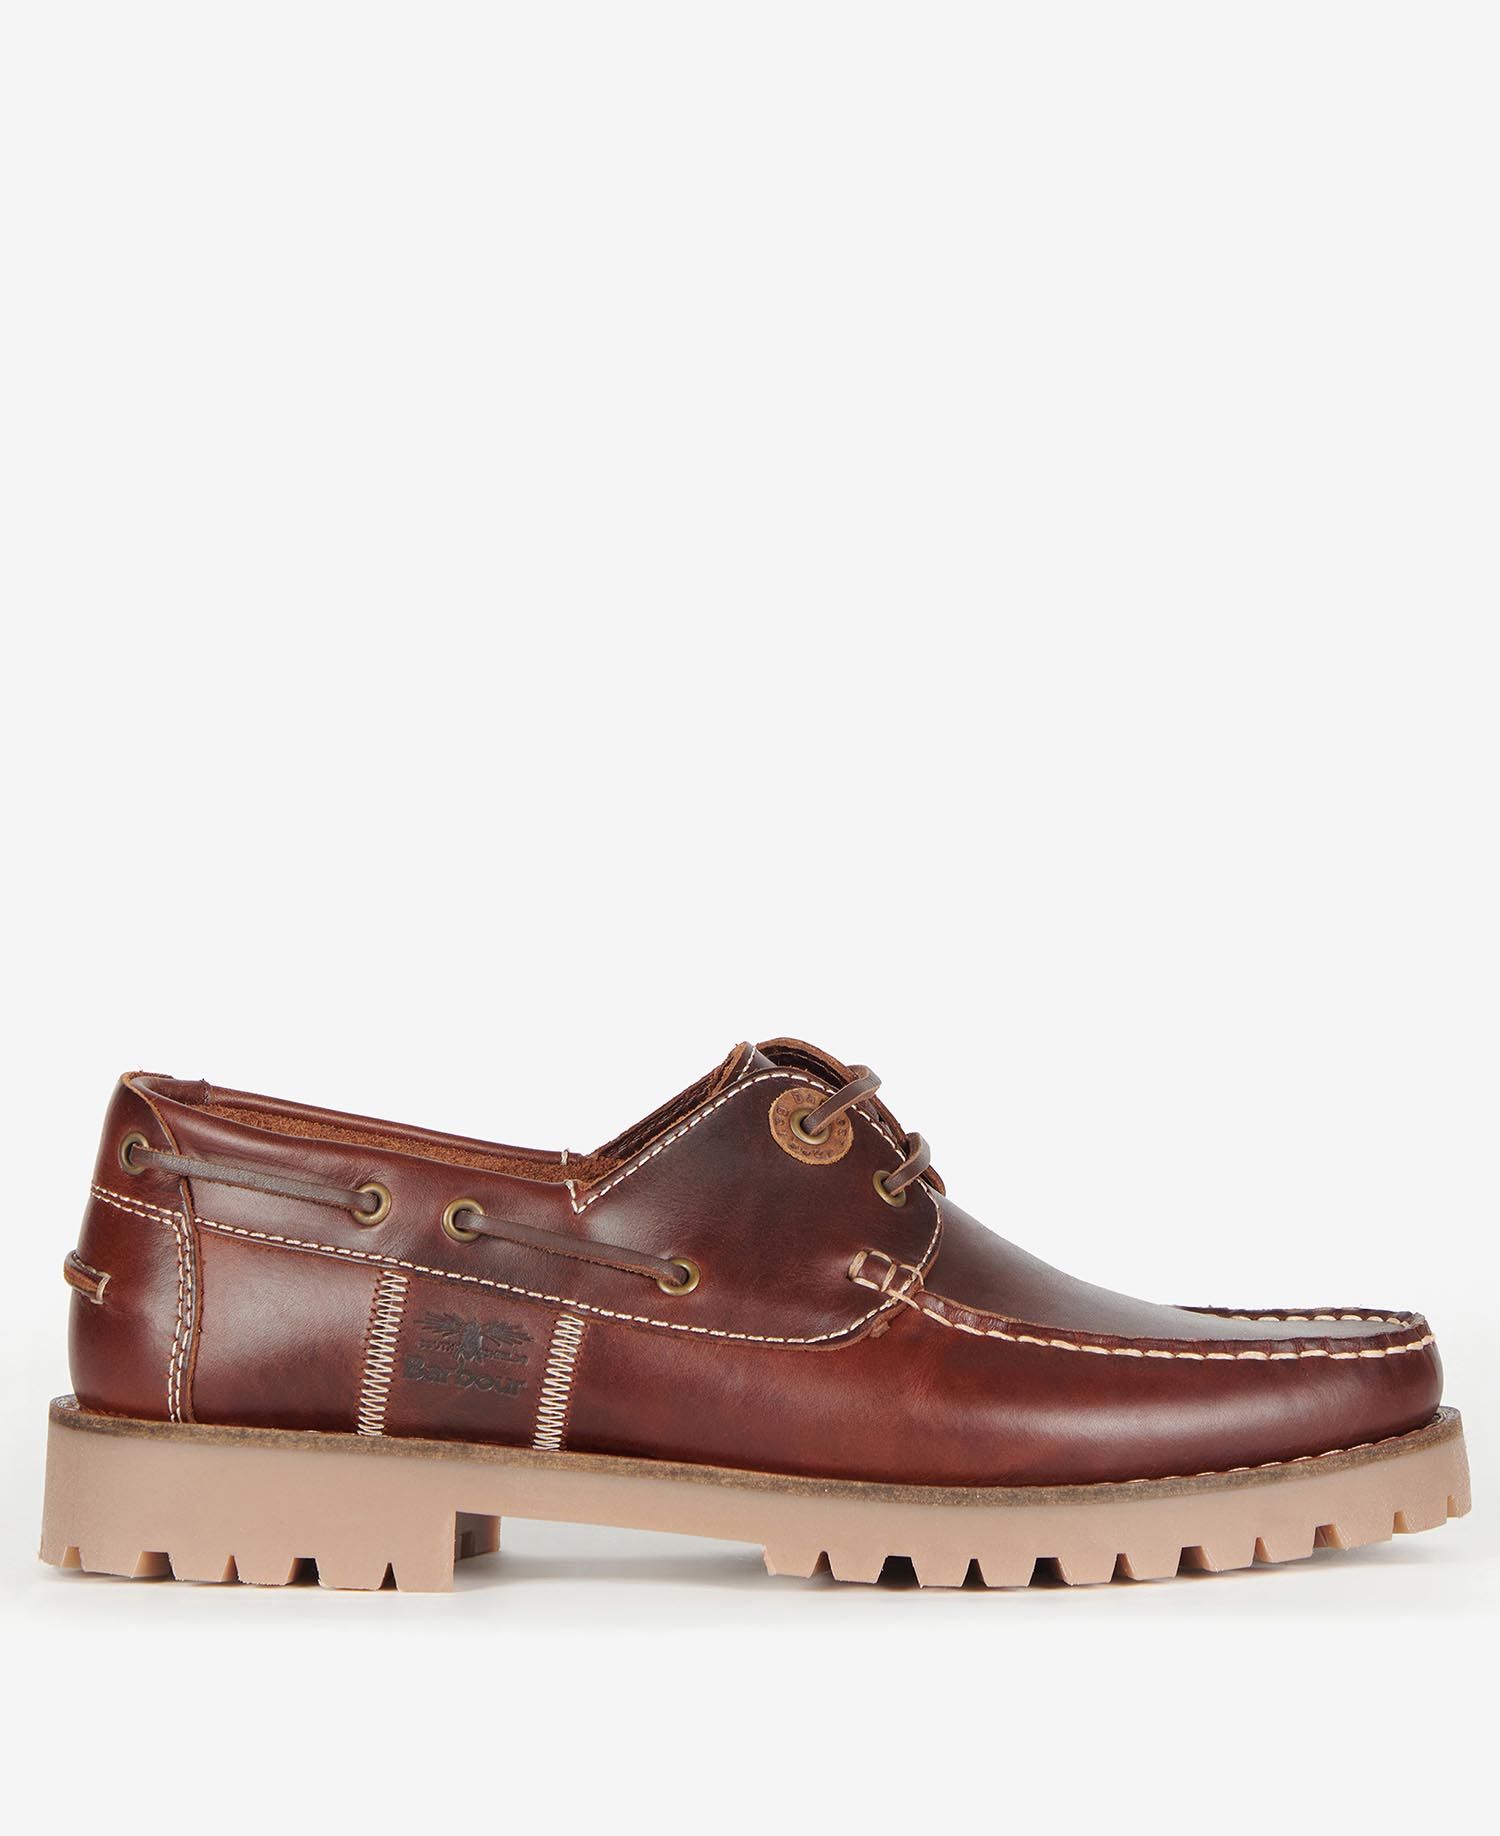 Barbour Stern Boat Shoes